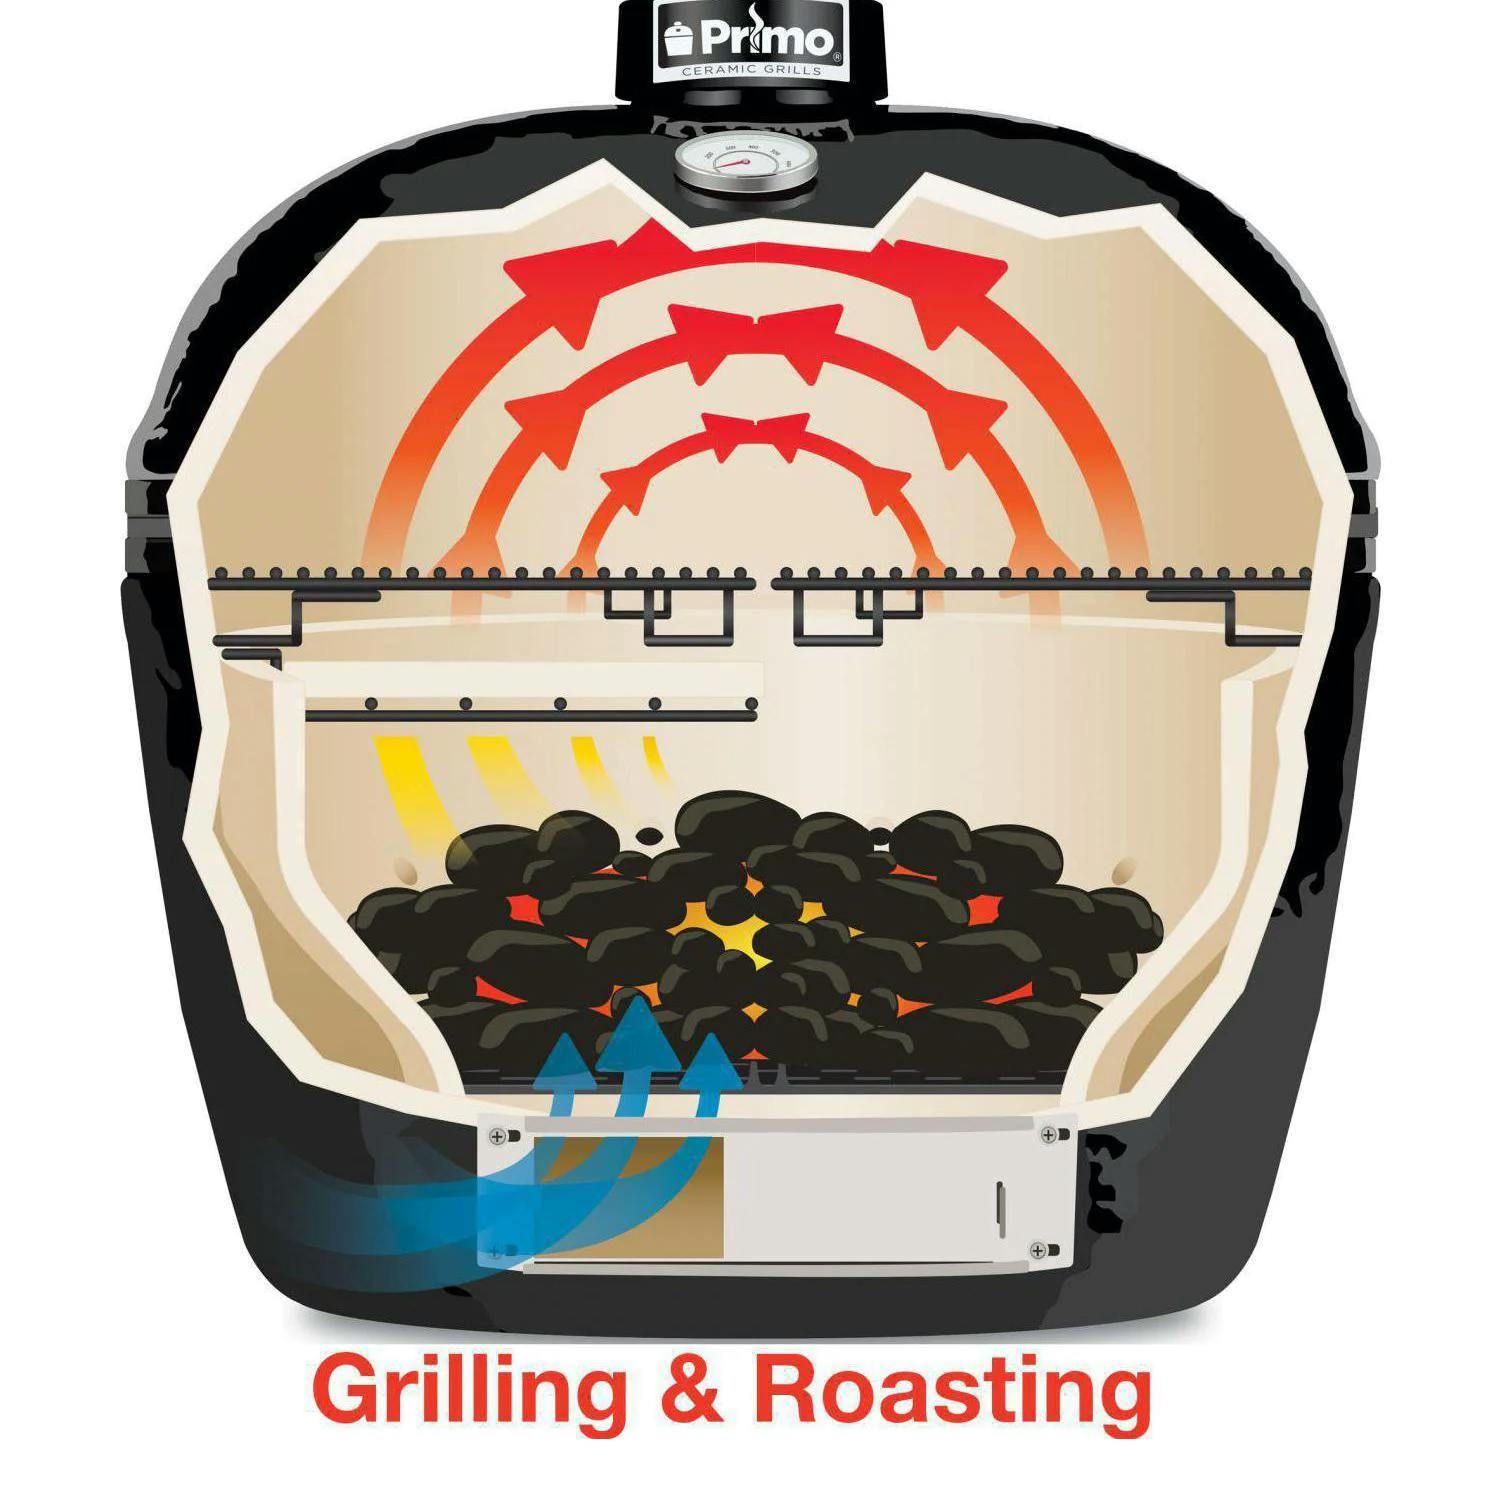 Primo Jack Daniels Edition Oval XL 400 Ceramic Kamado Grill with Stainless Steel Grates